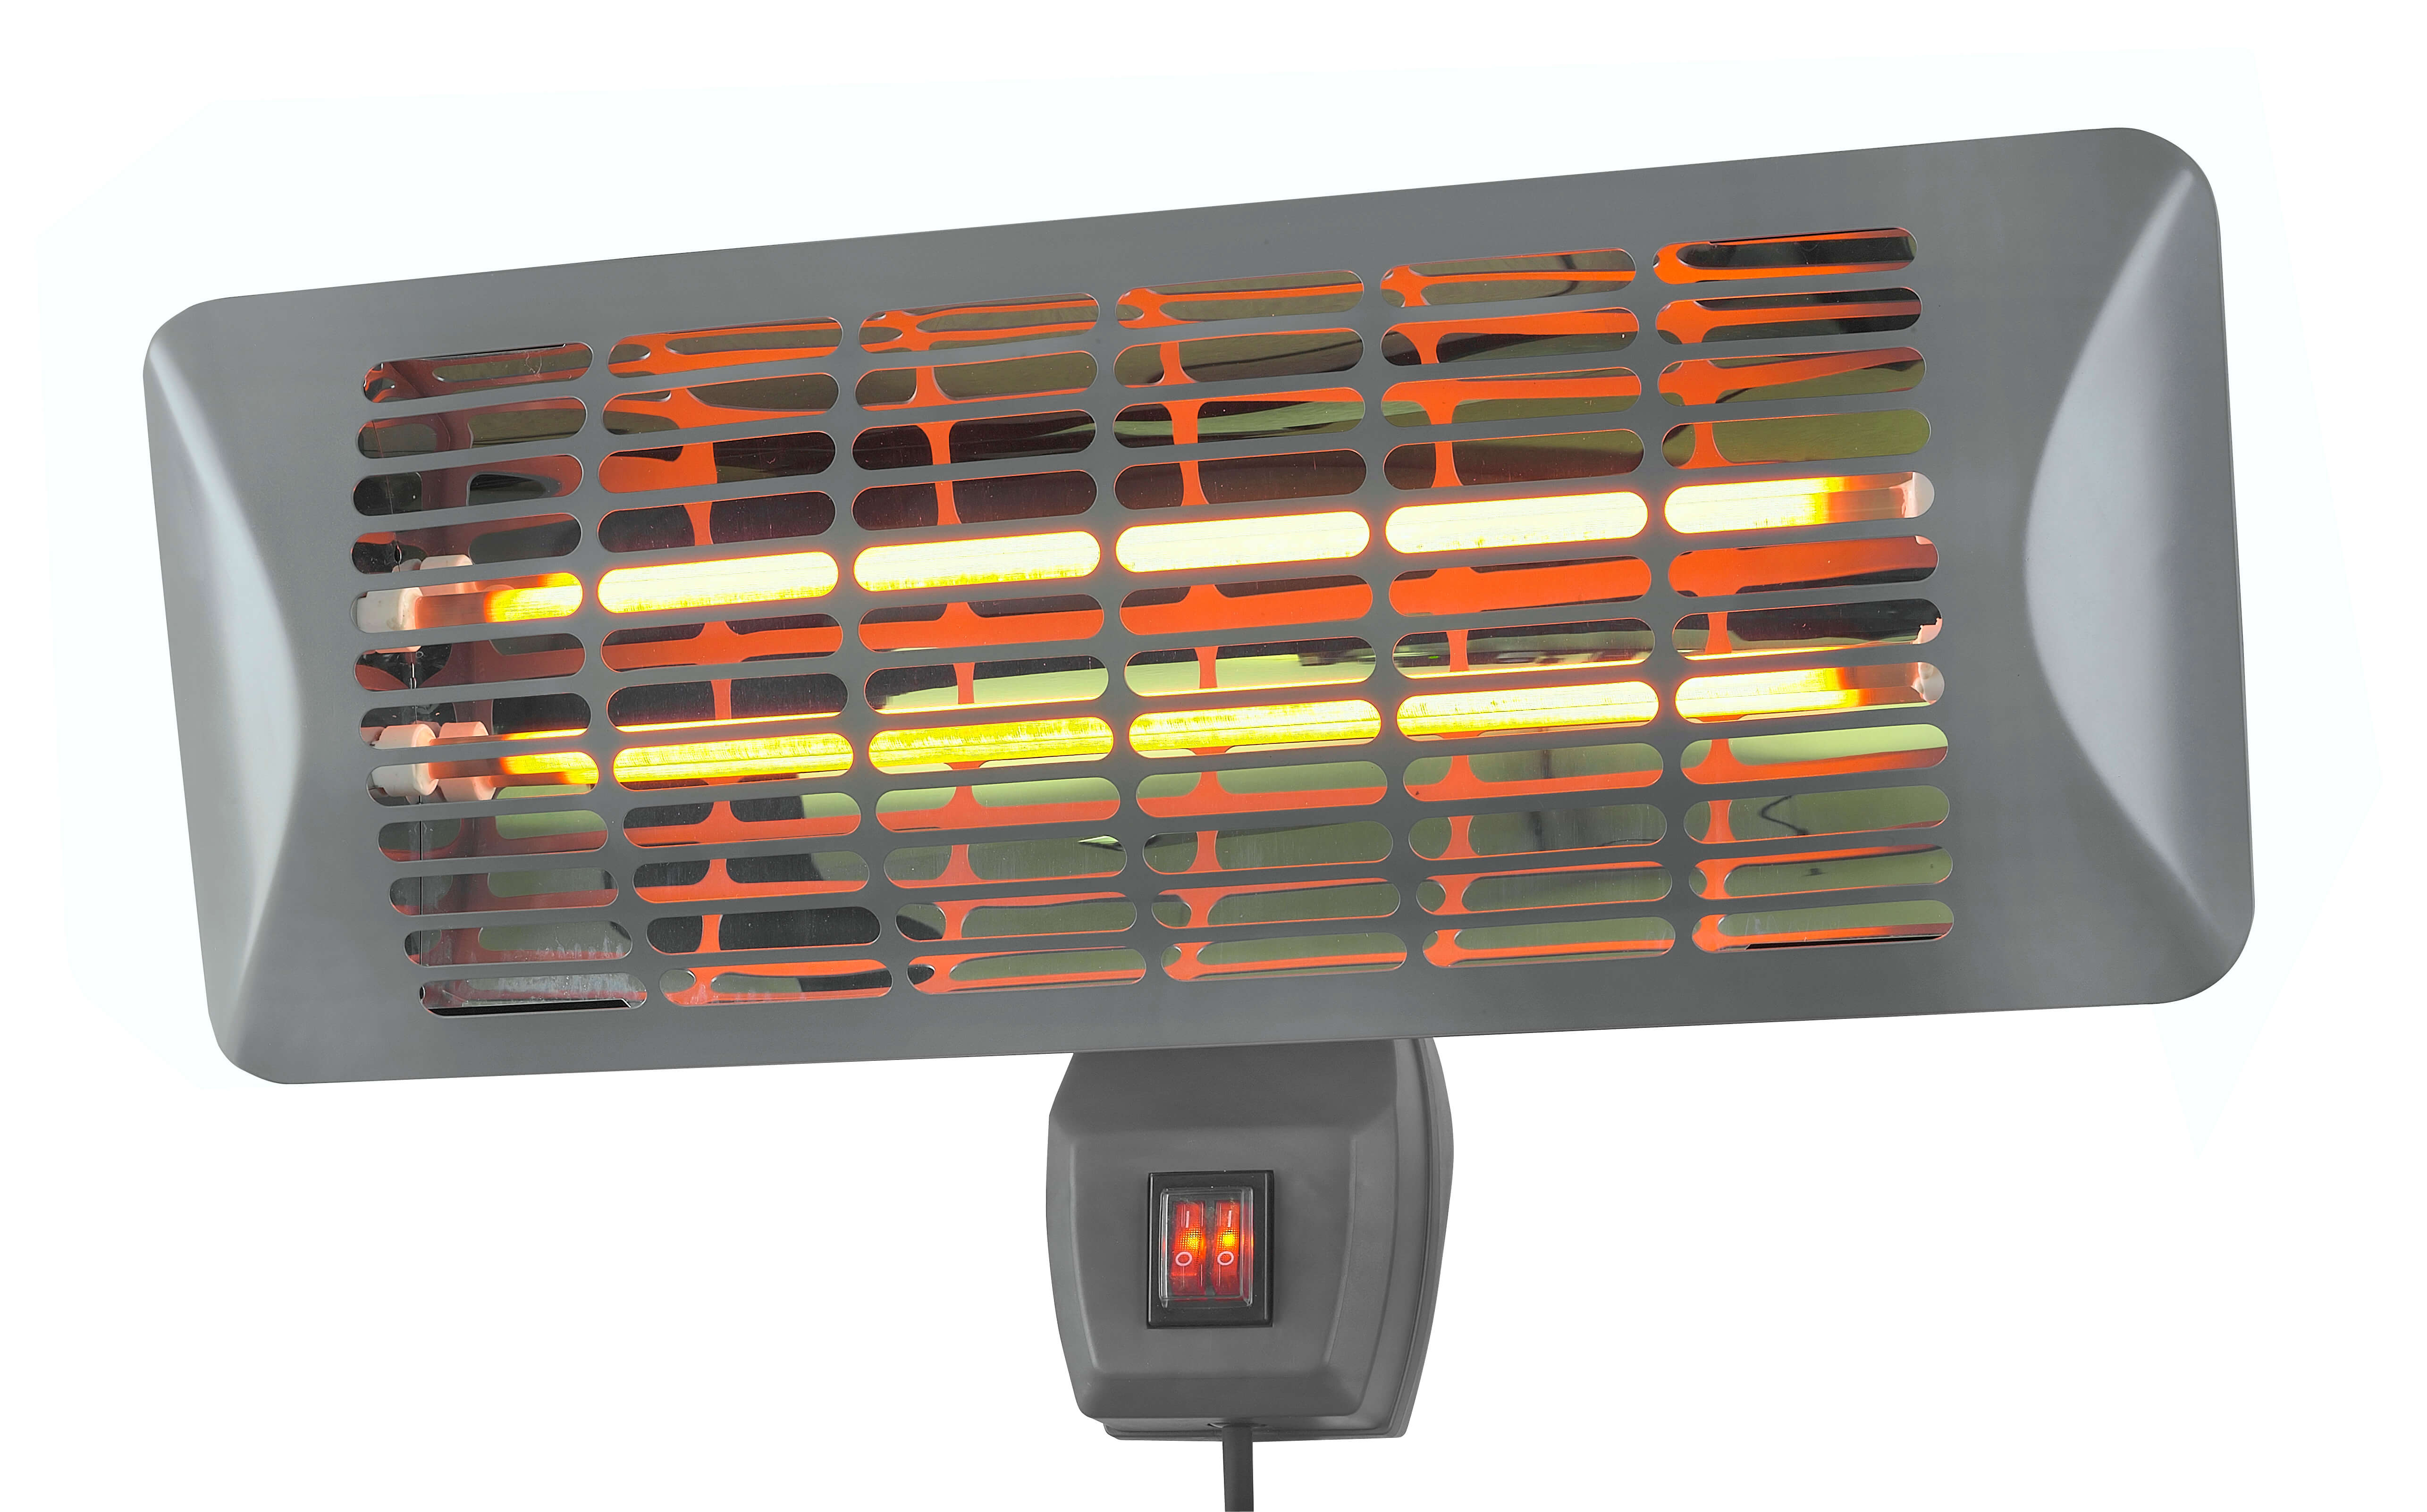 EUROM Q-TIME 2000- is an electric patio heater of 2000 watts. That is why well suited to warm up the cool summer evenings.